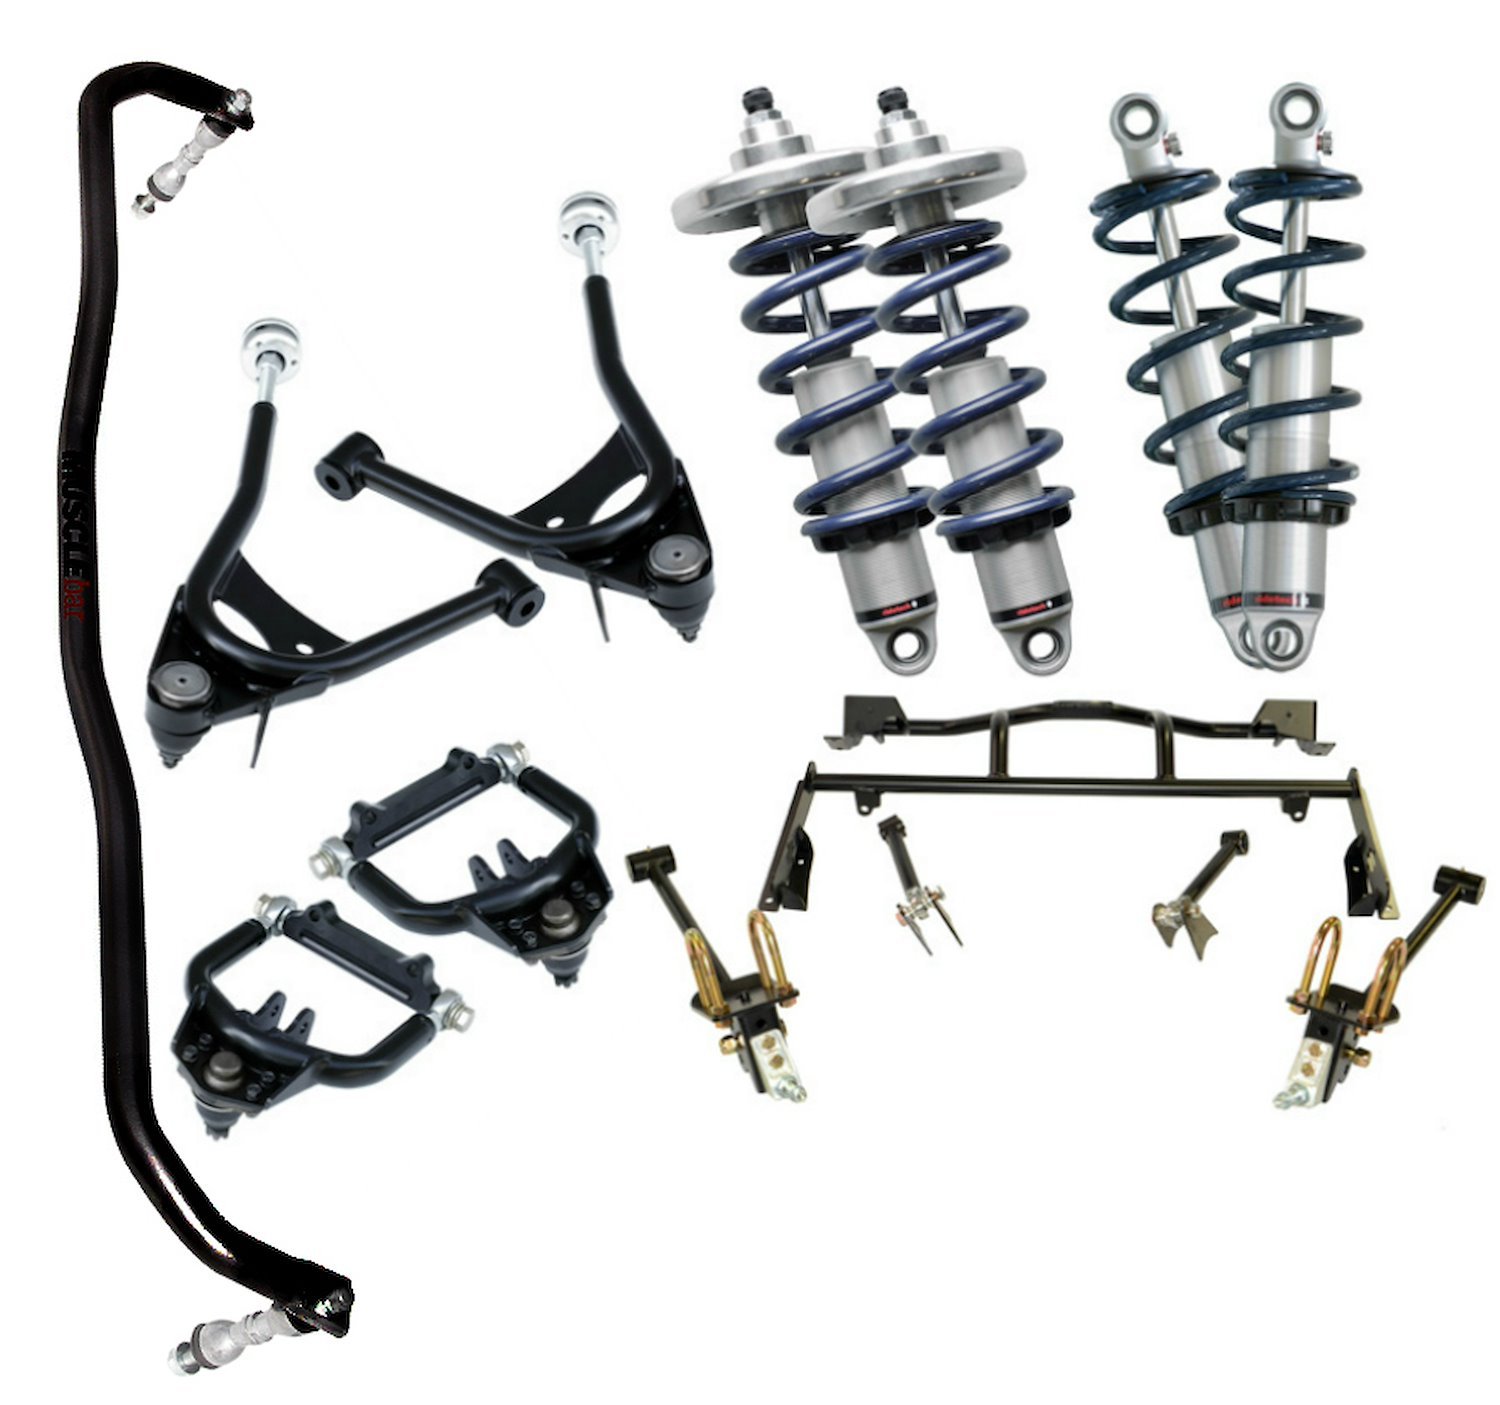 CoilOver System for 67-70 Cougar. Includes front and rear HQ Series CoilOvers/ front upper and lower